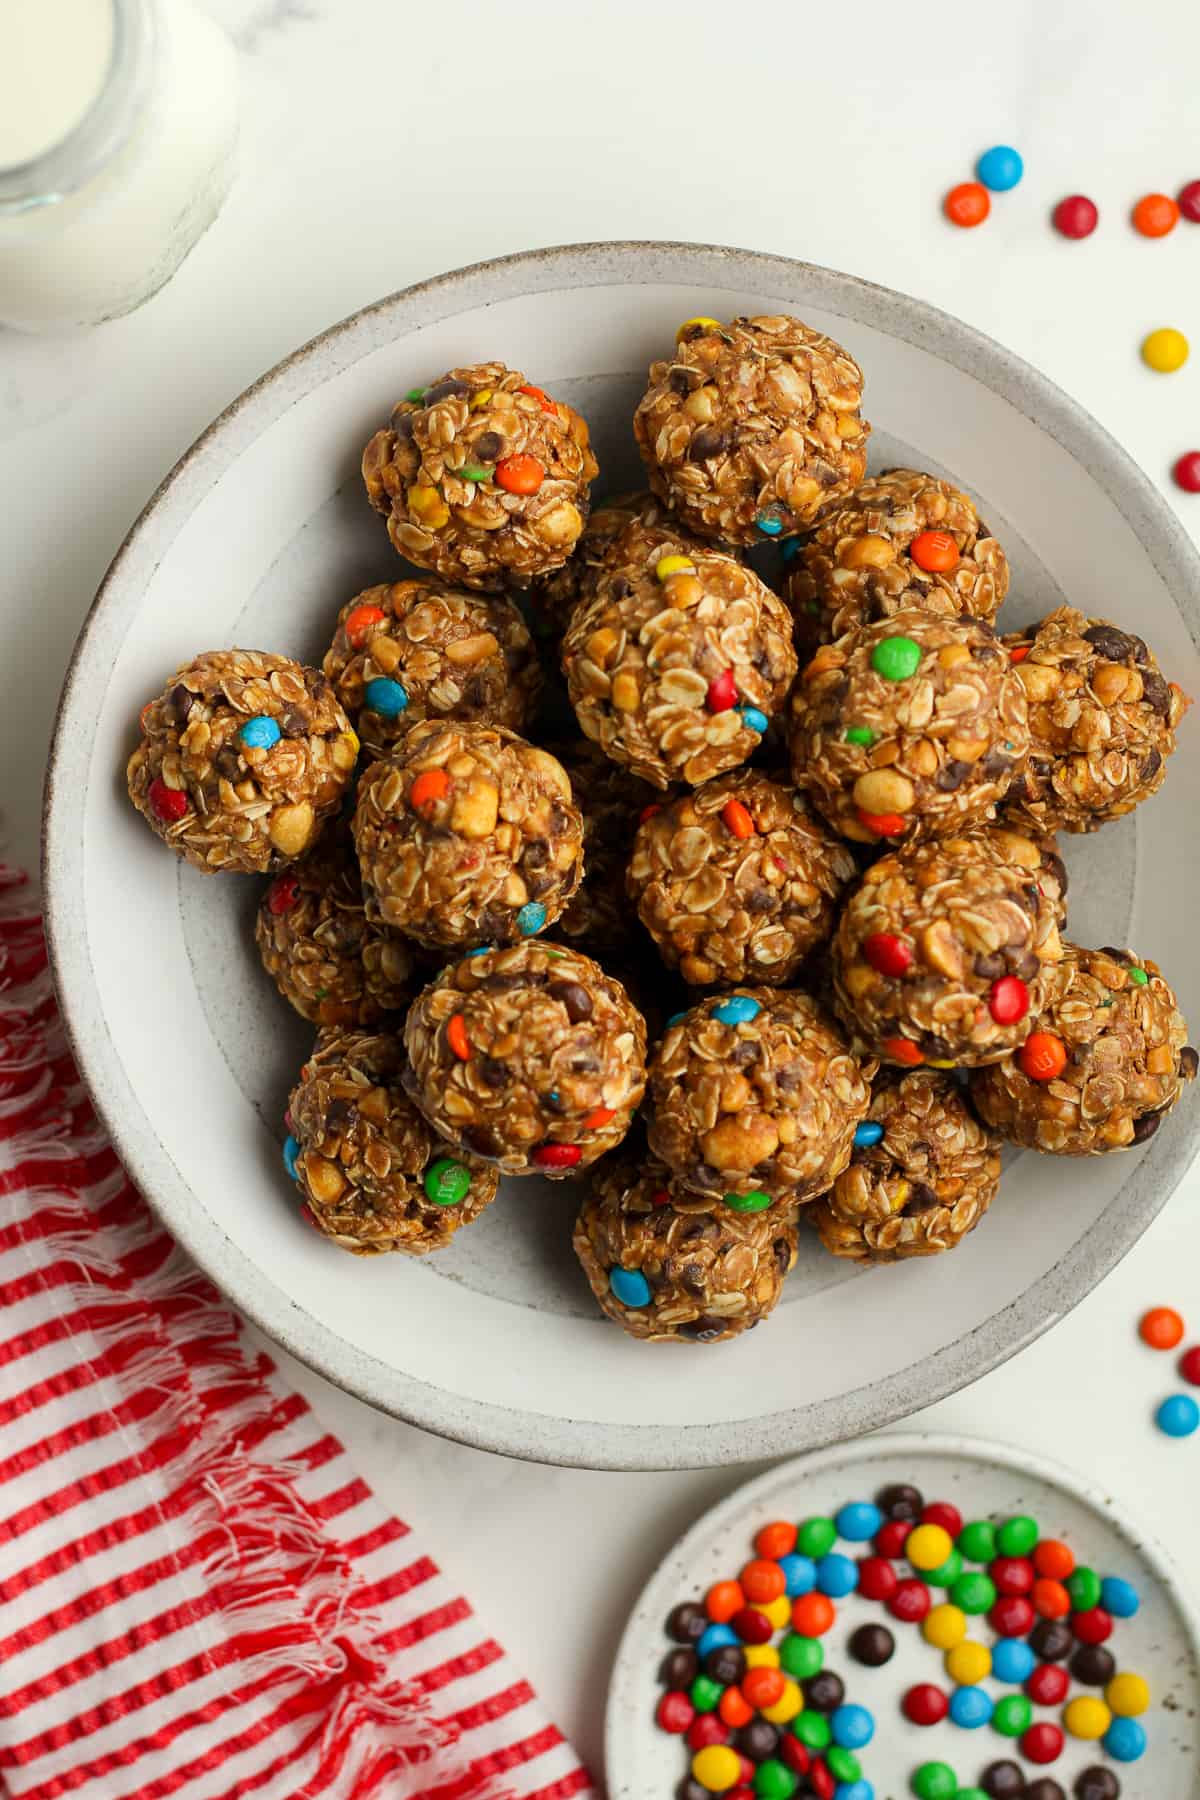 A bowl of the no bake monster balls with m&ms.